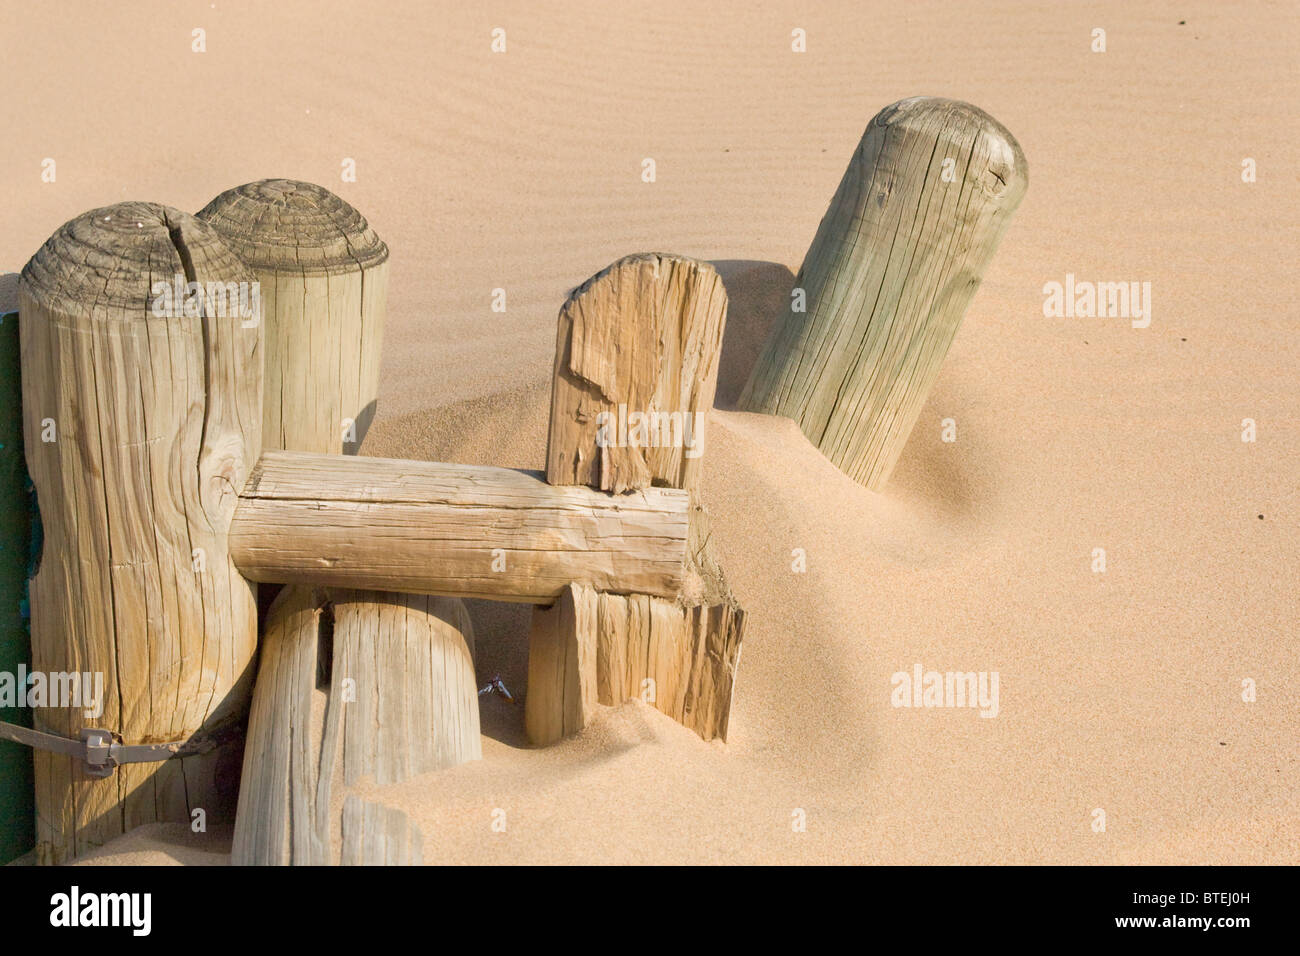 Old wooden fence poles half buried in beach sand Stock Photo